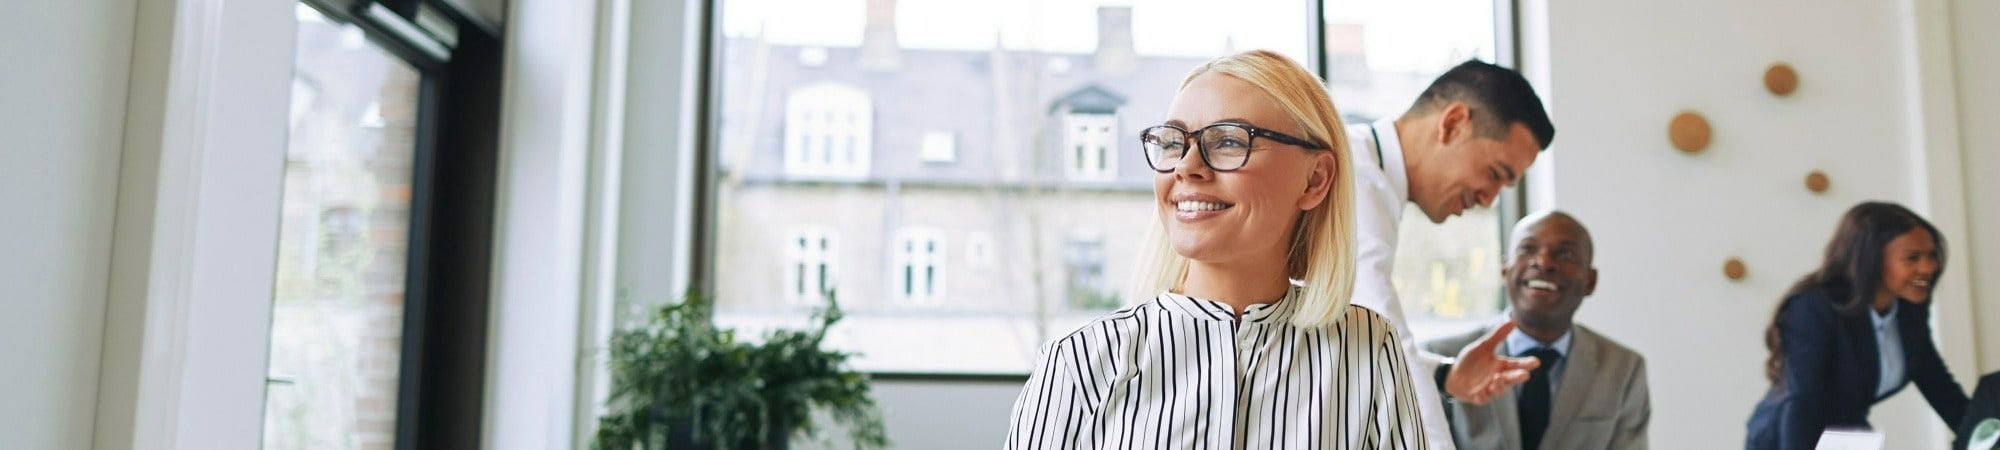 blonde woman smiling in modern office 